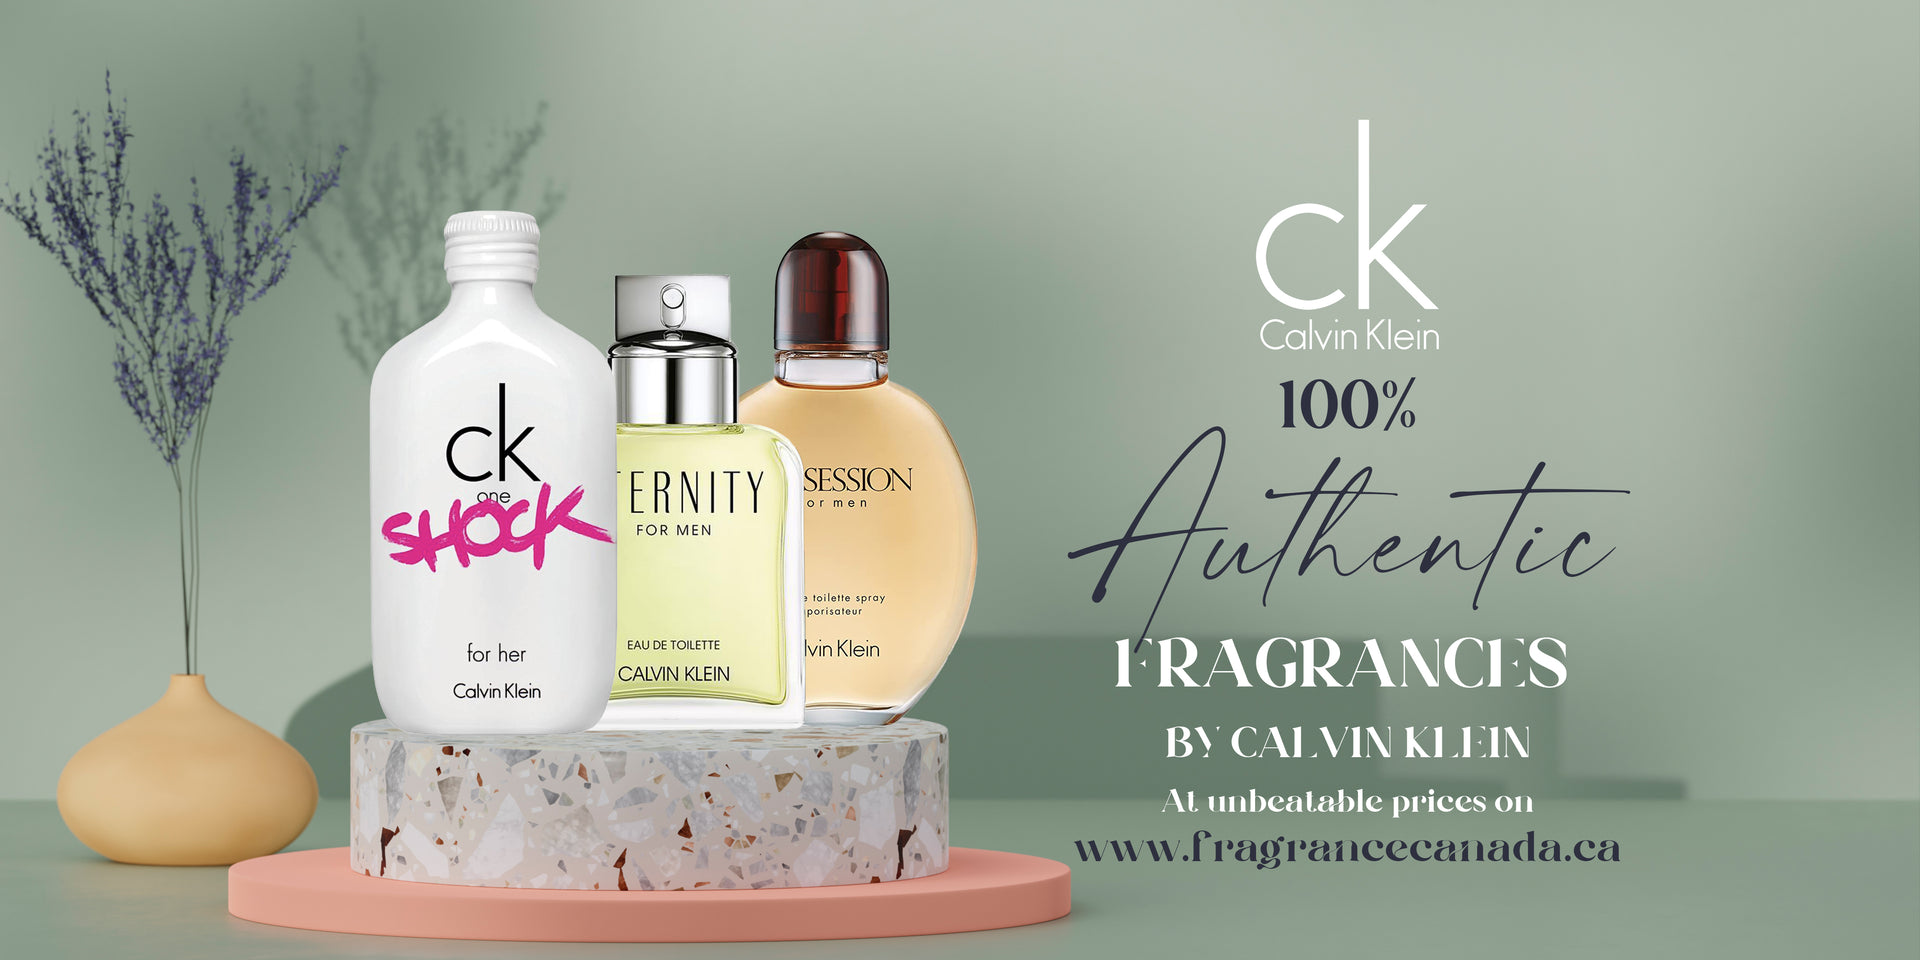 Calvin Klein Perfumes and Colognes online in Canada at best prices –